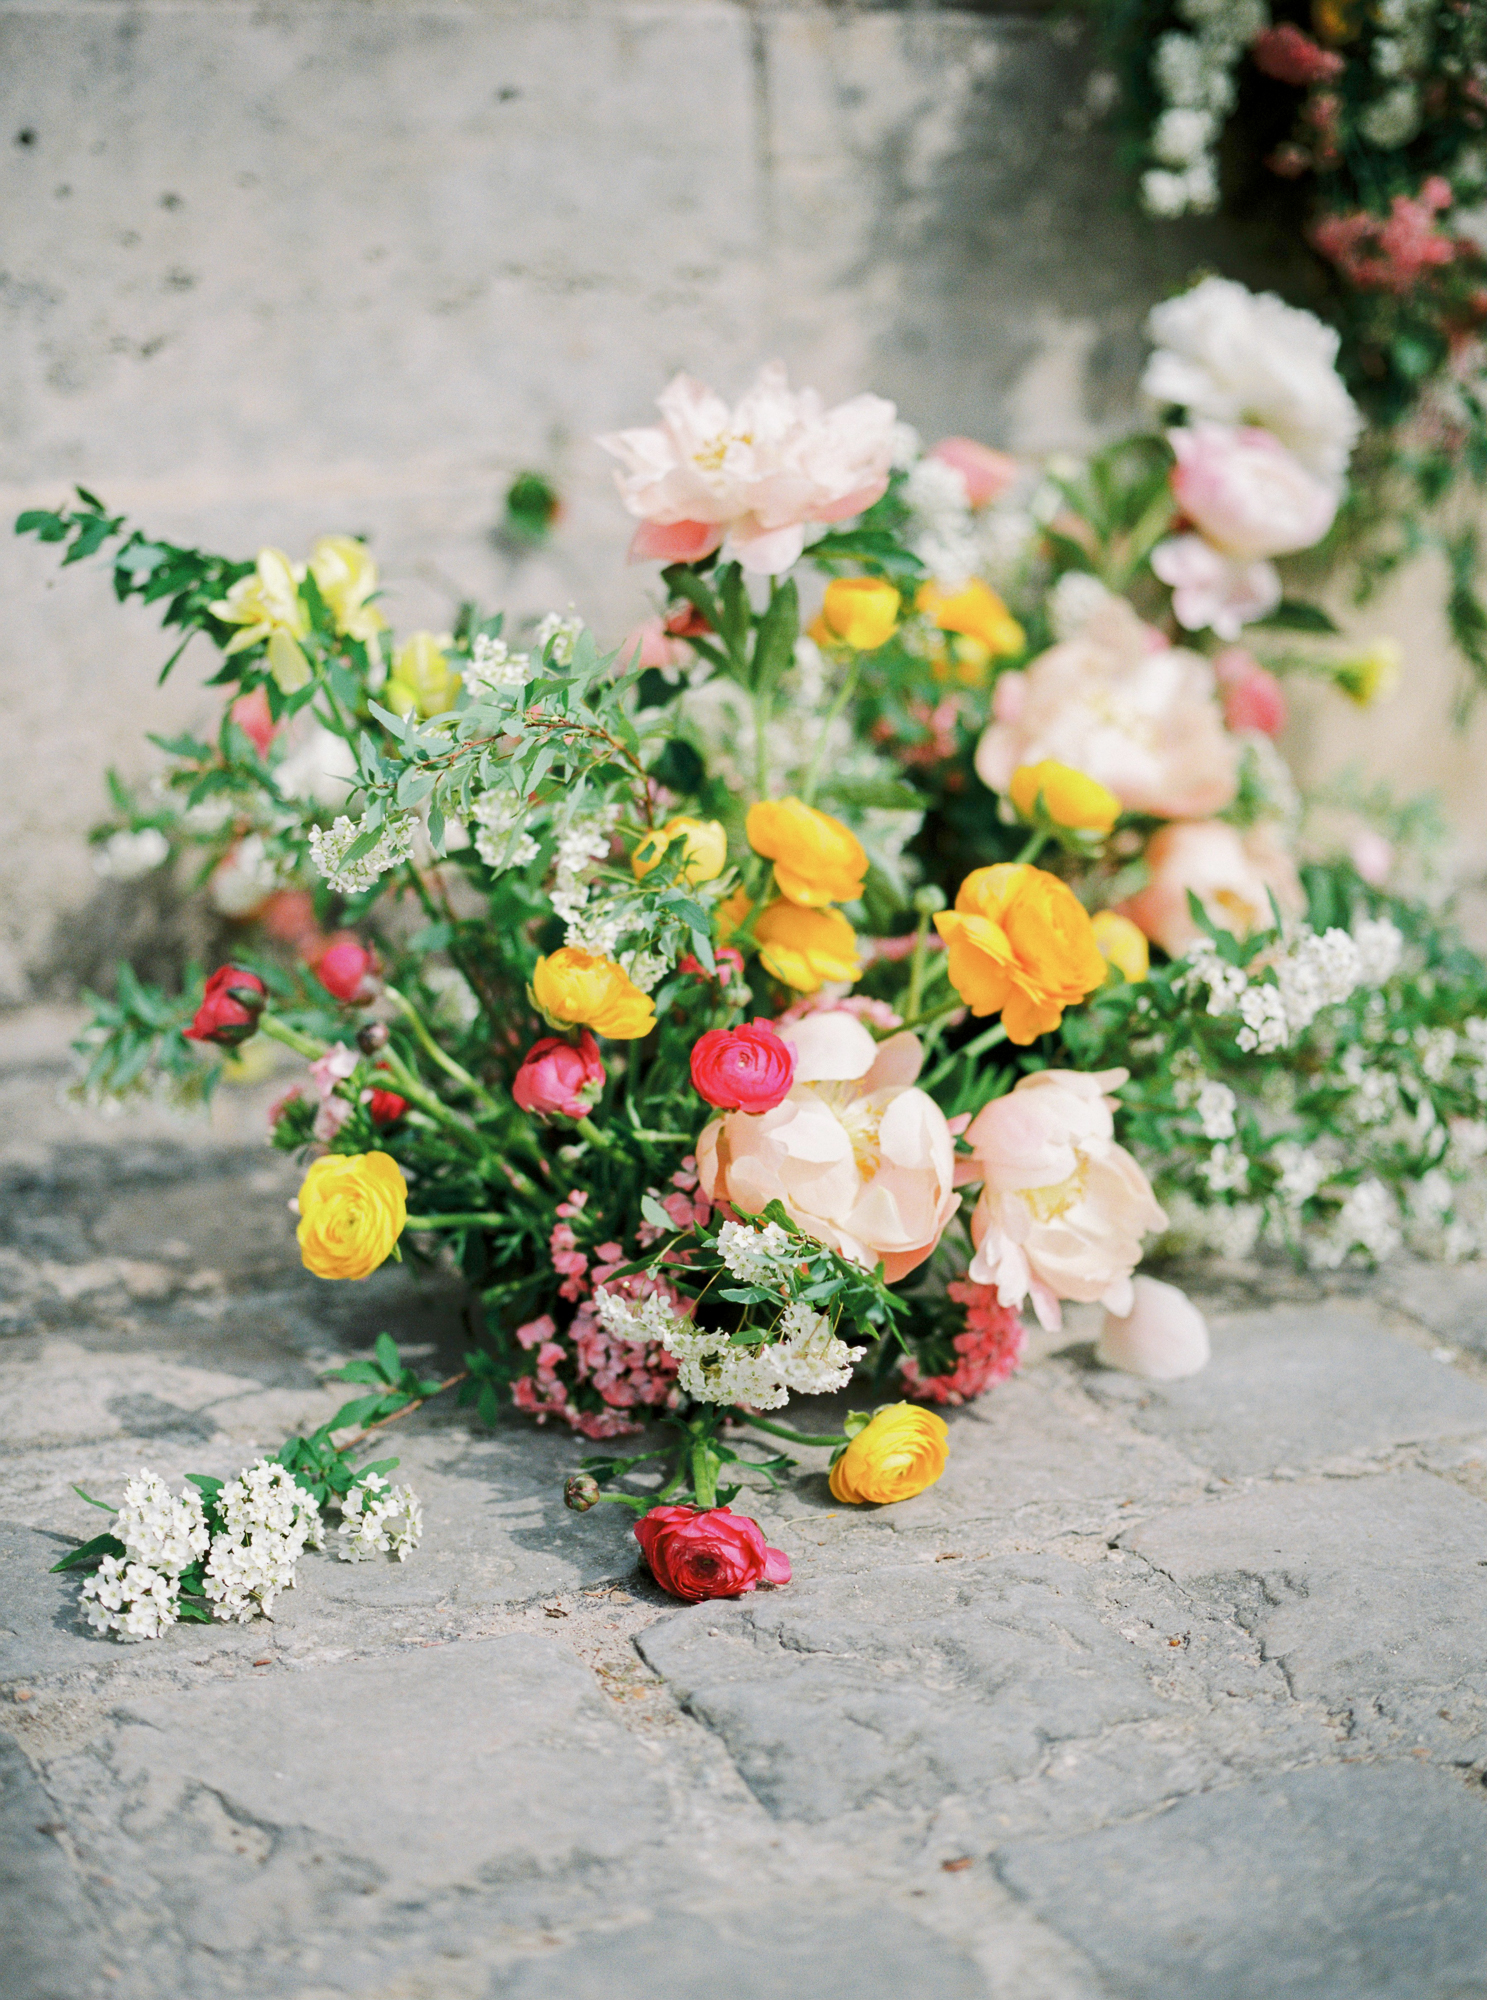 travellur_photoshoot__summer_in_versailles_wedding_flowers_bridal_luxe_shoot_floral_france_isibeal_studio_beauty_wedding_france.jpg